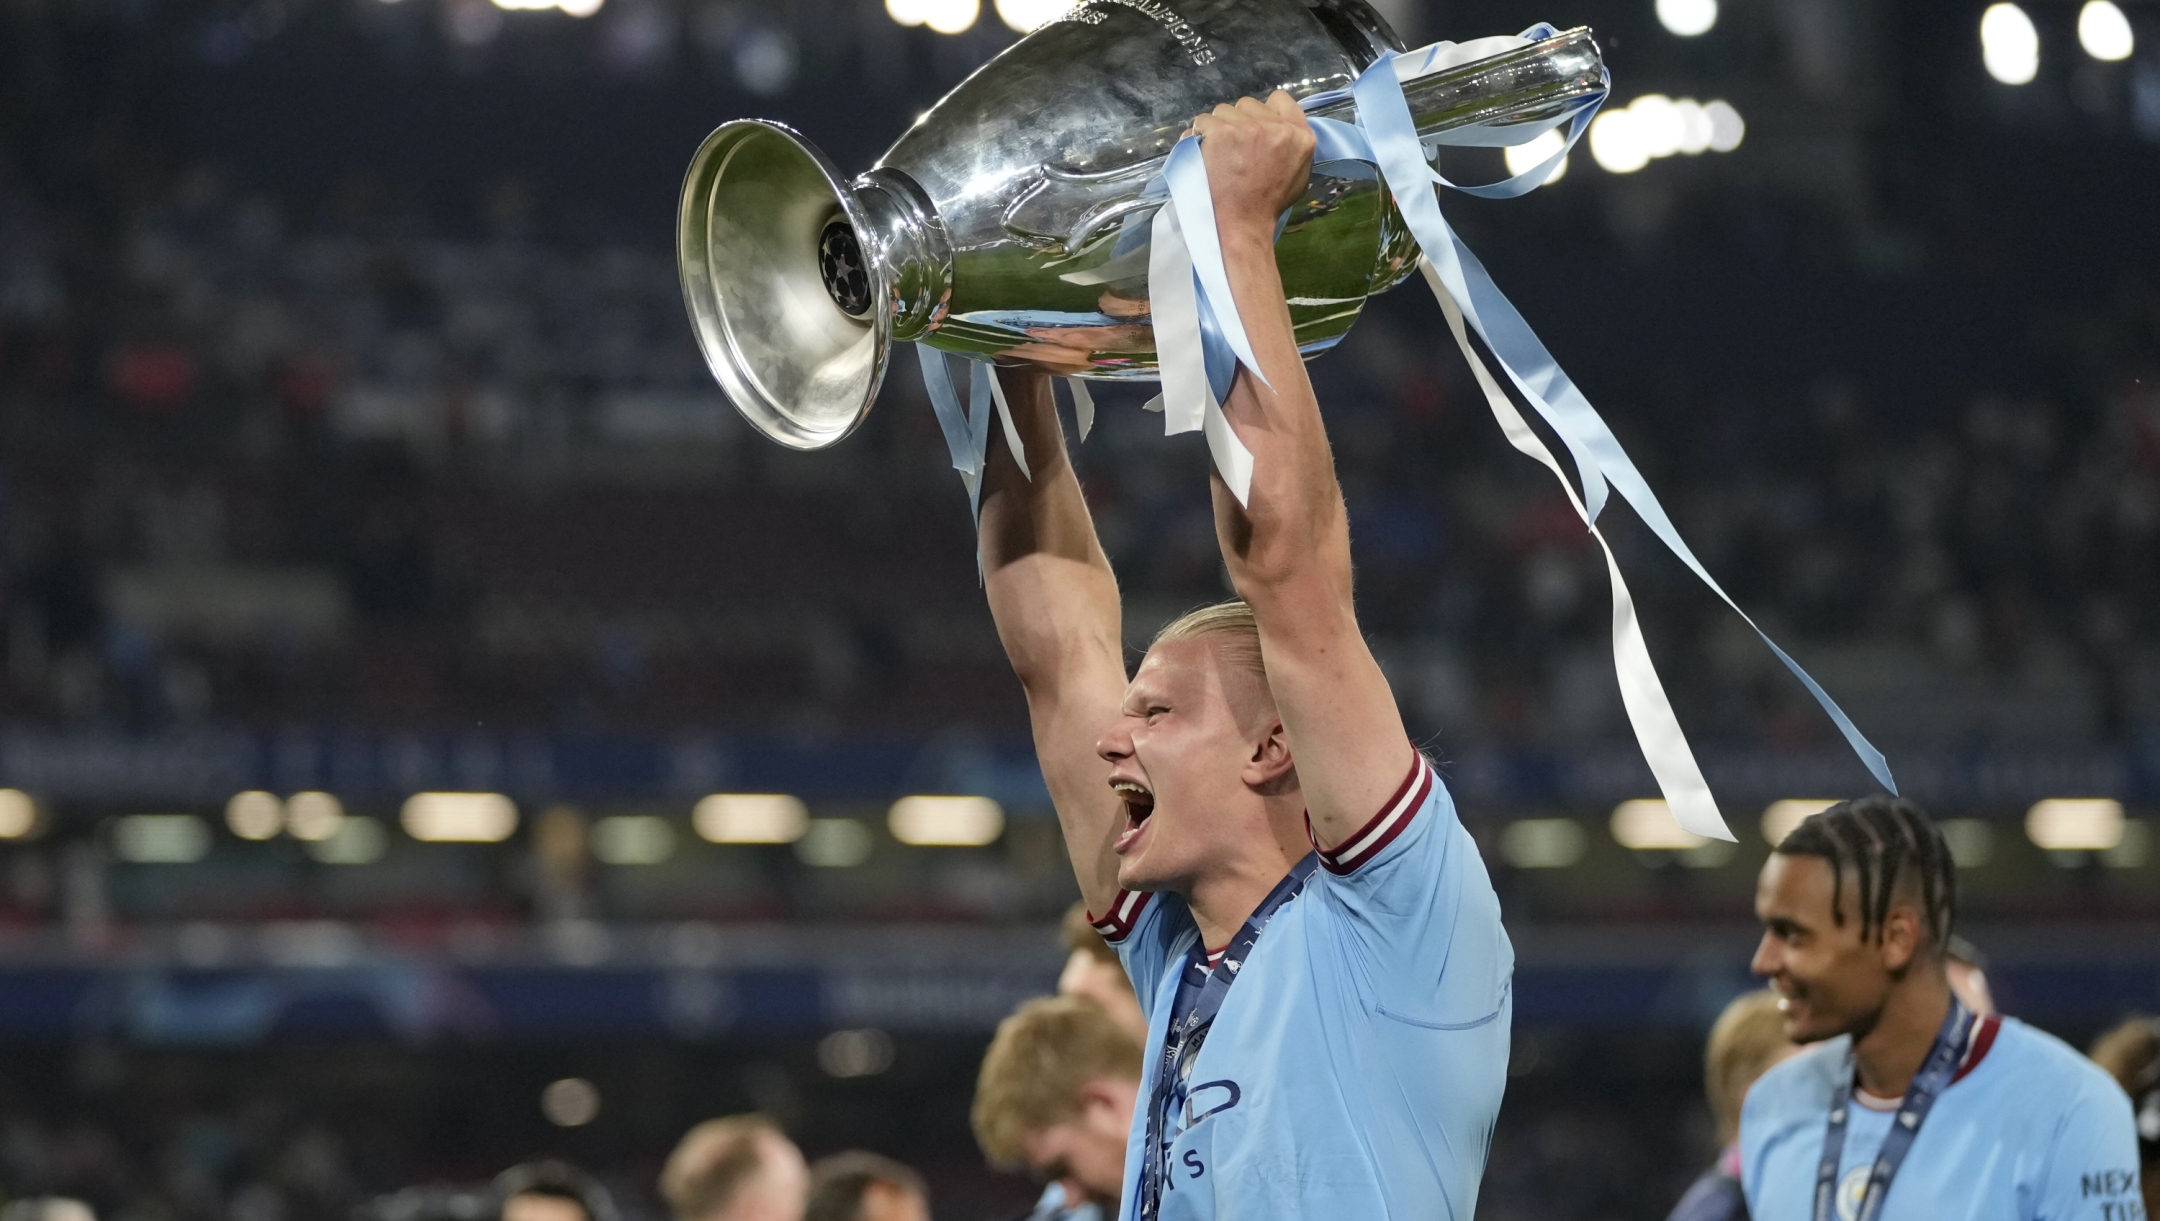 Manchester City's Erling Haaland celebrates with the trophy after winning the Champions League final soccer match between Manchester City and Inter Milan at the Ataturk Olympic Stadium in Istanbul, Turkey, Sunday, June 11, 2023. Manchester City won 1-0. (AP Photo/Francisco Seco)